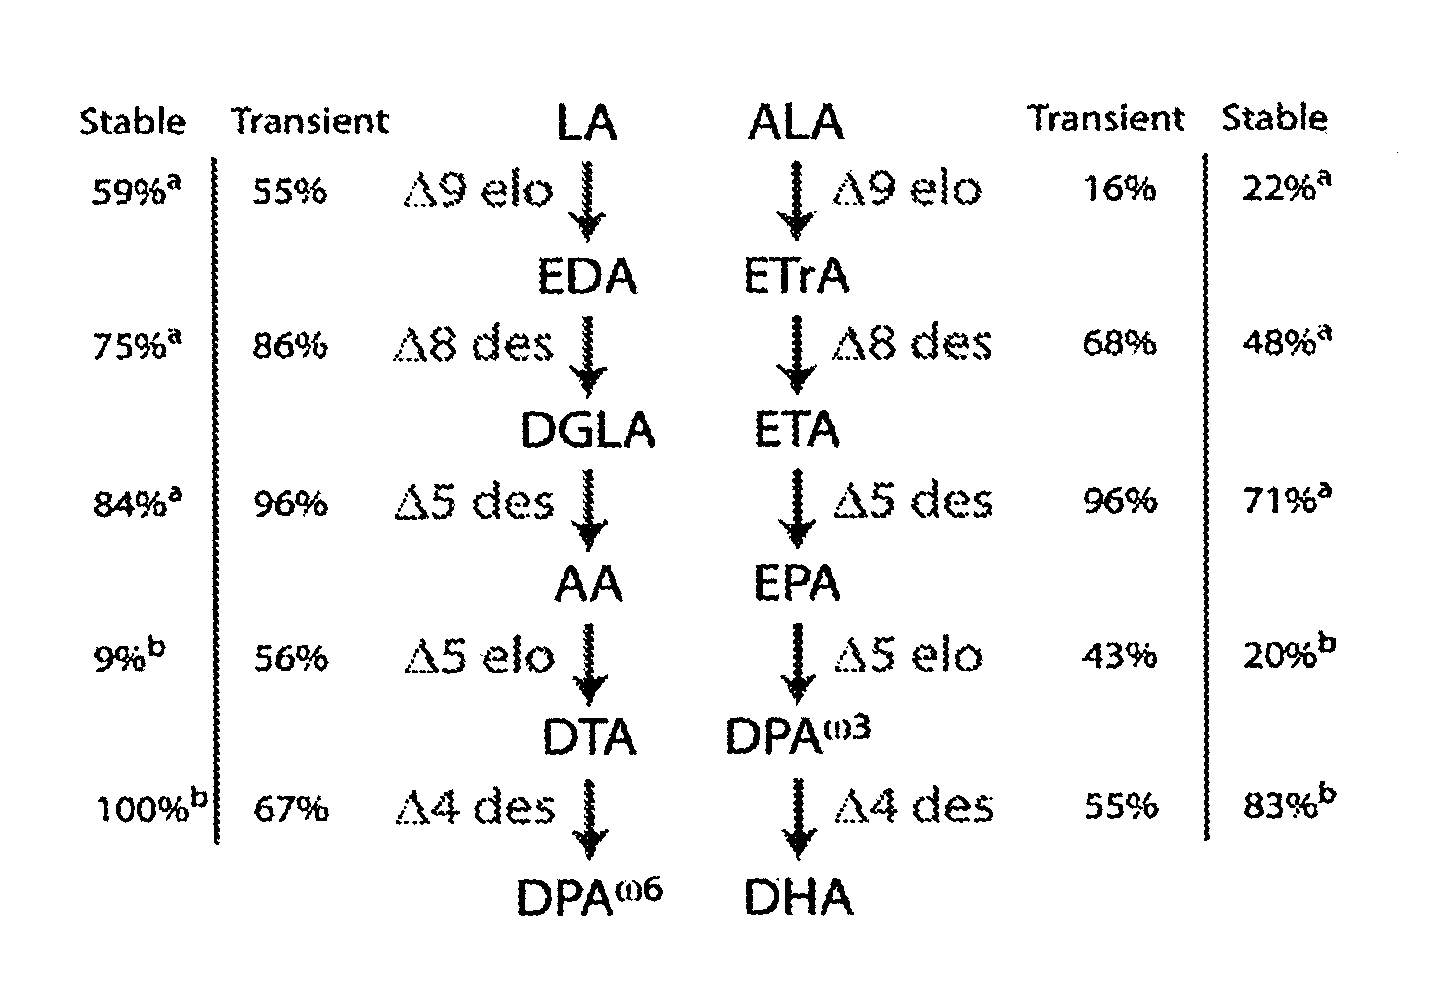 Enzymes and methods for producing omega-3 fatty acids